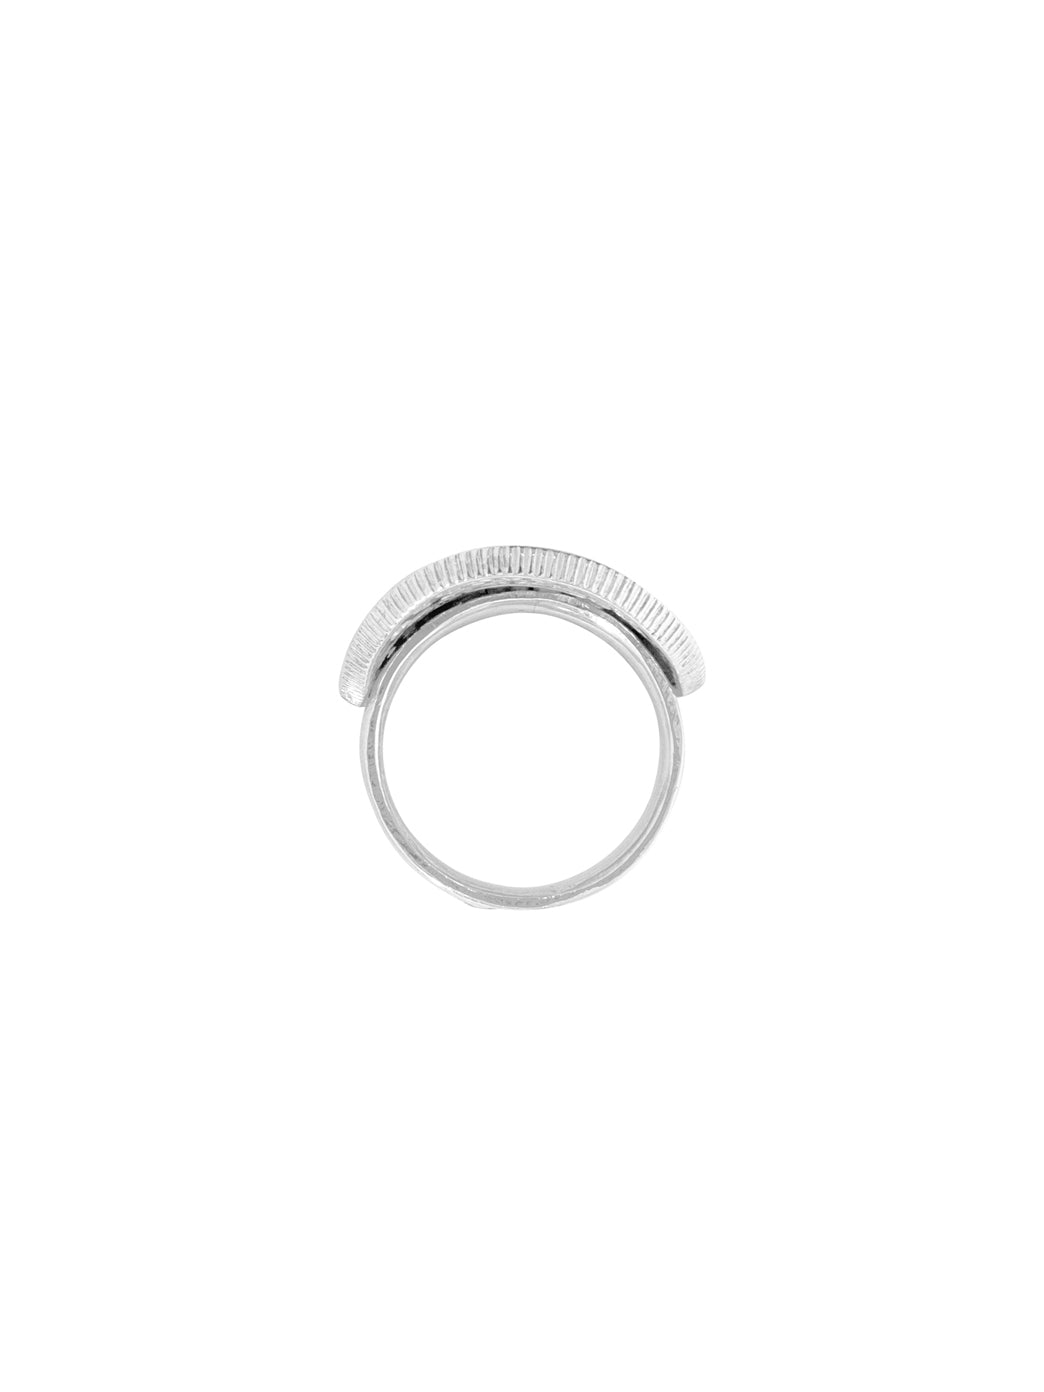 Fiorina Jewellery Bent Coin Ring Side View